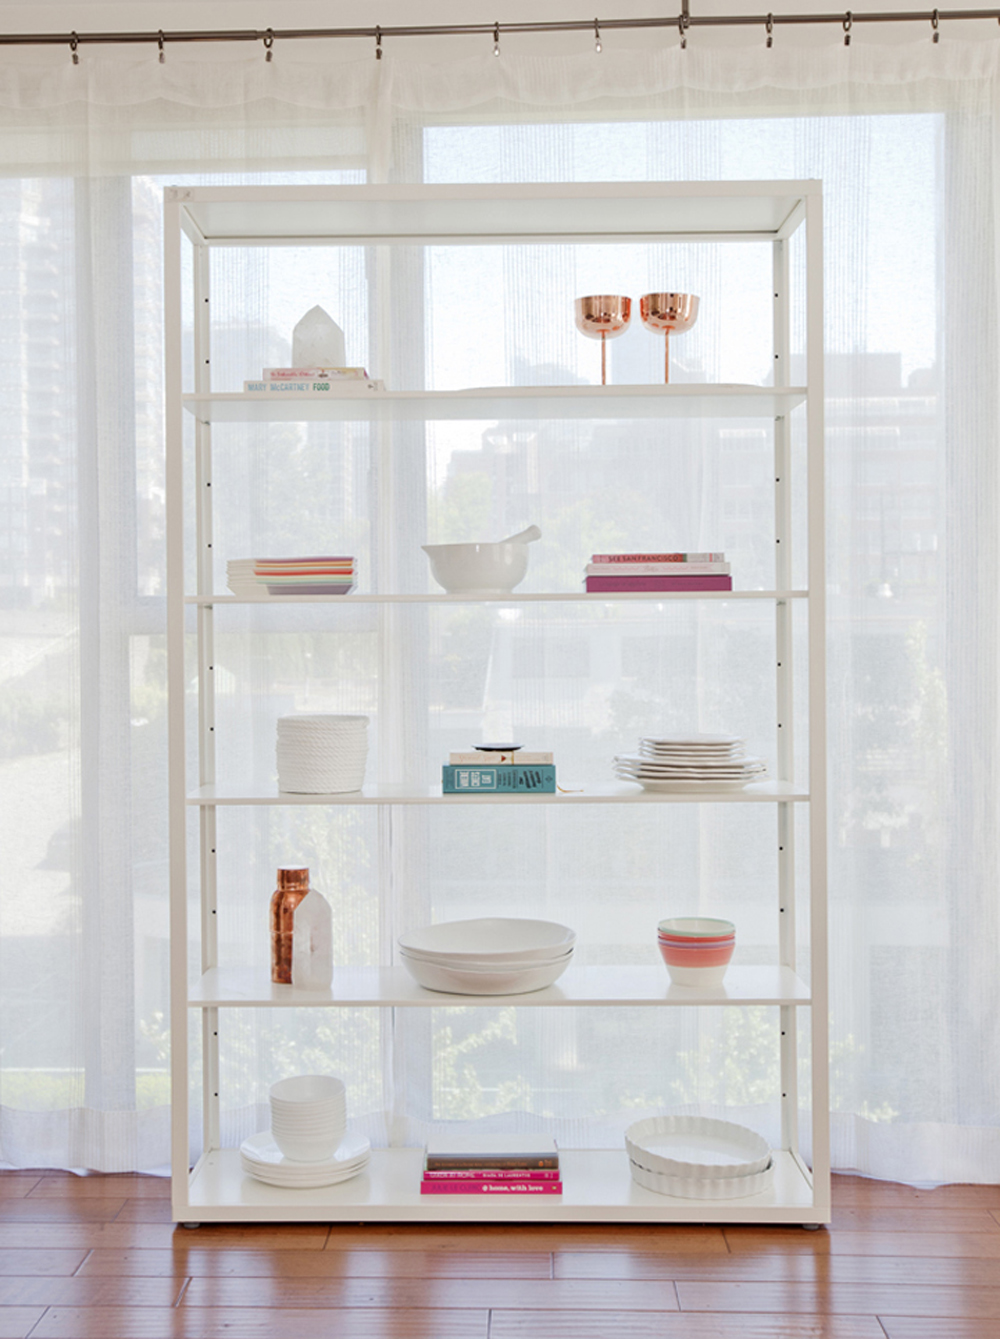 A white shelf with organized stacks of plates, cups and cookbooks